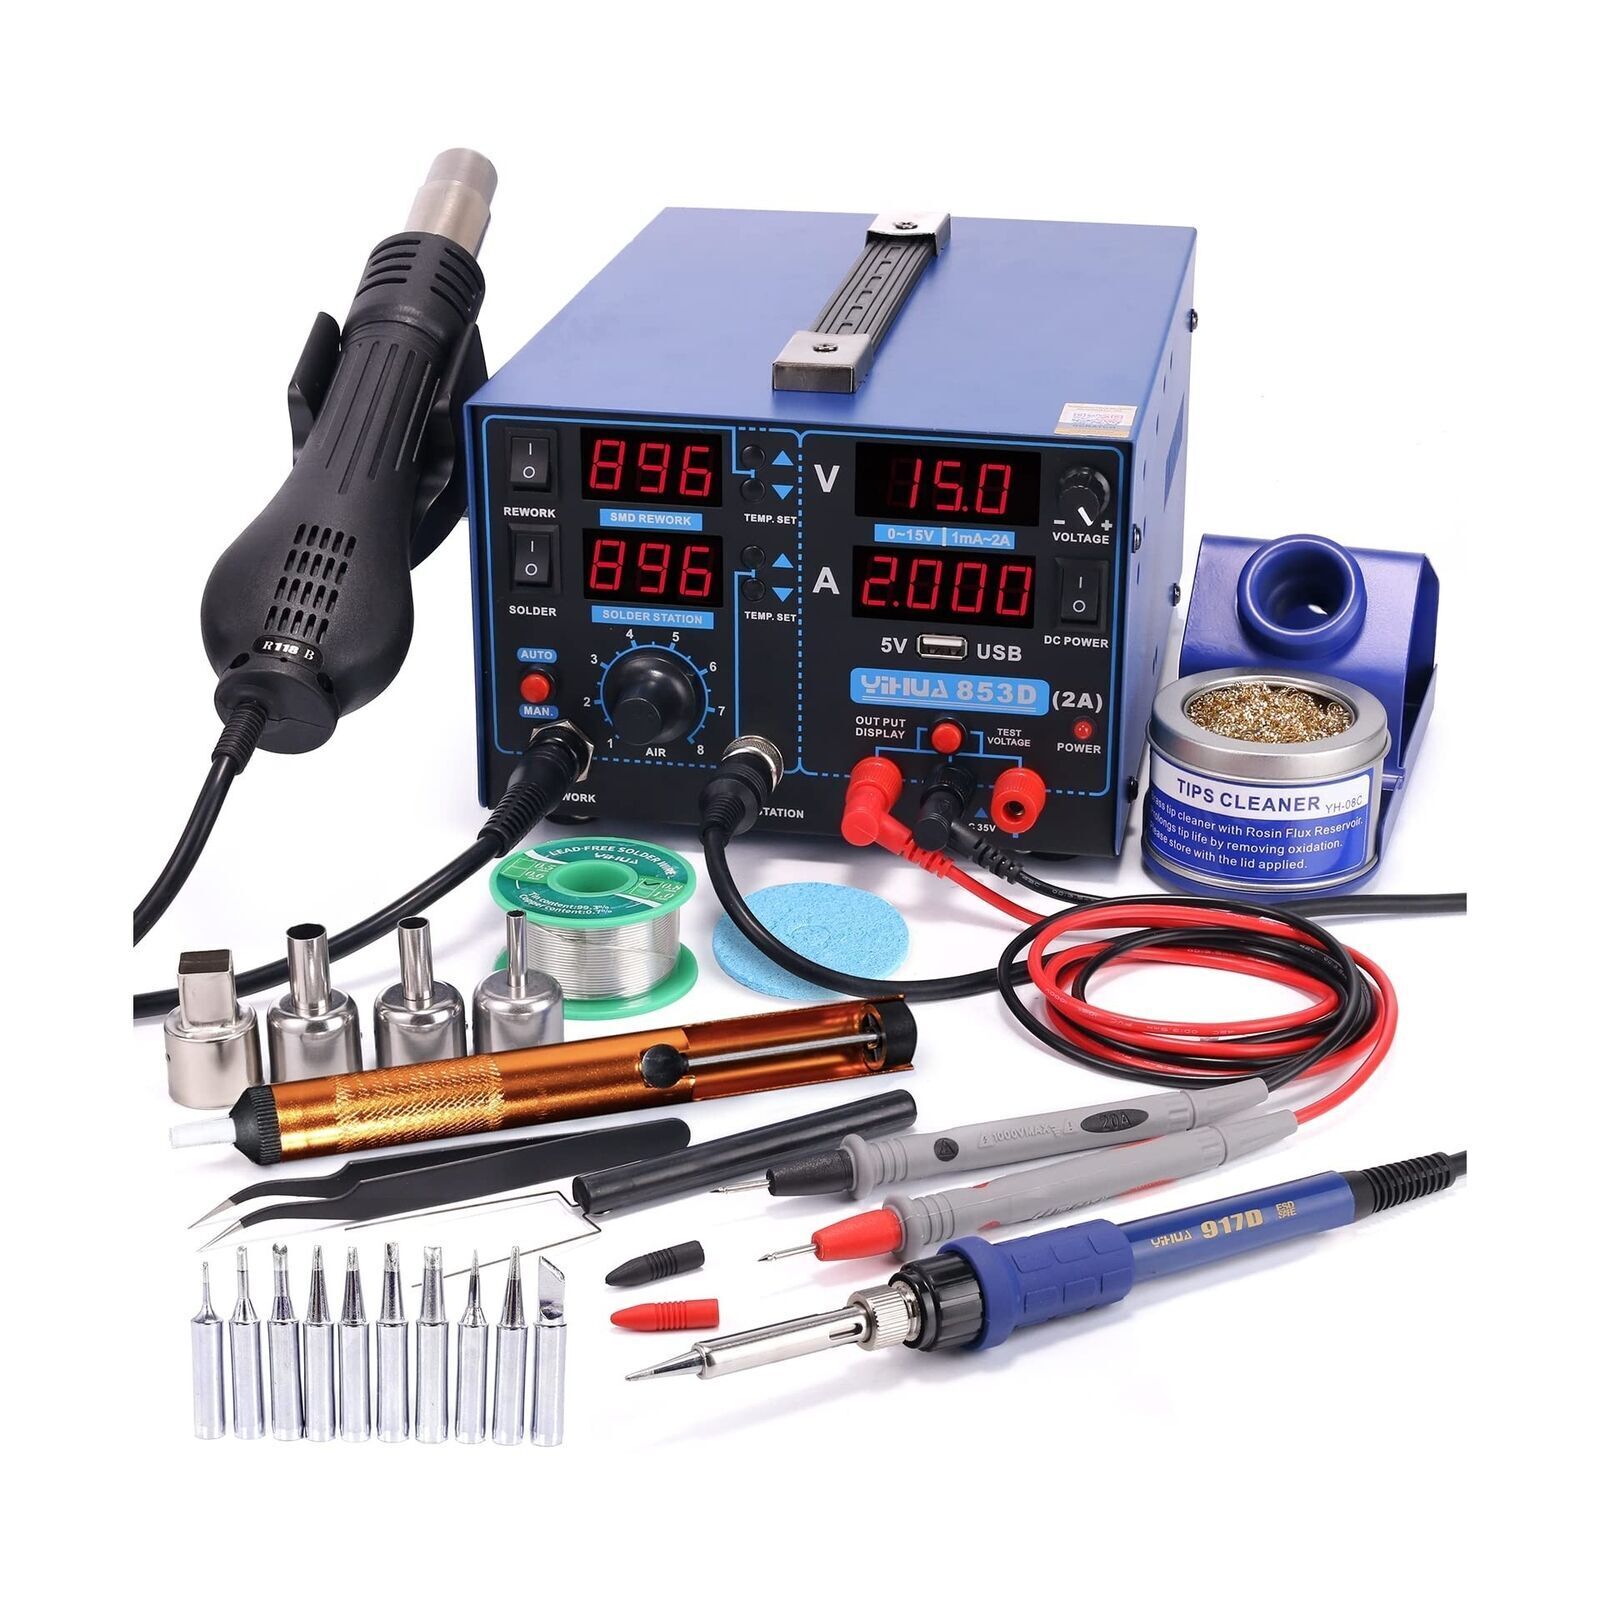 YIHUA 853D 2A USB SMD Hot Air Rework Soldering Iron Station, DC Power Supply ...